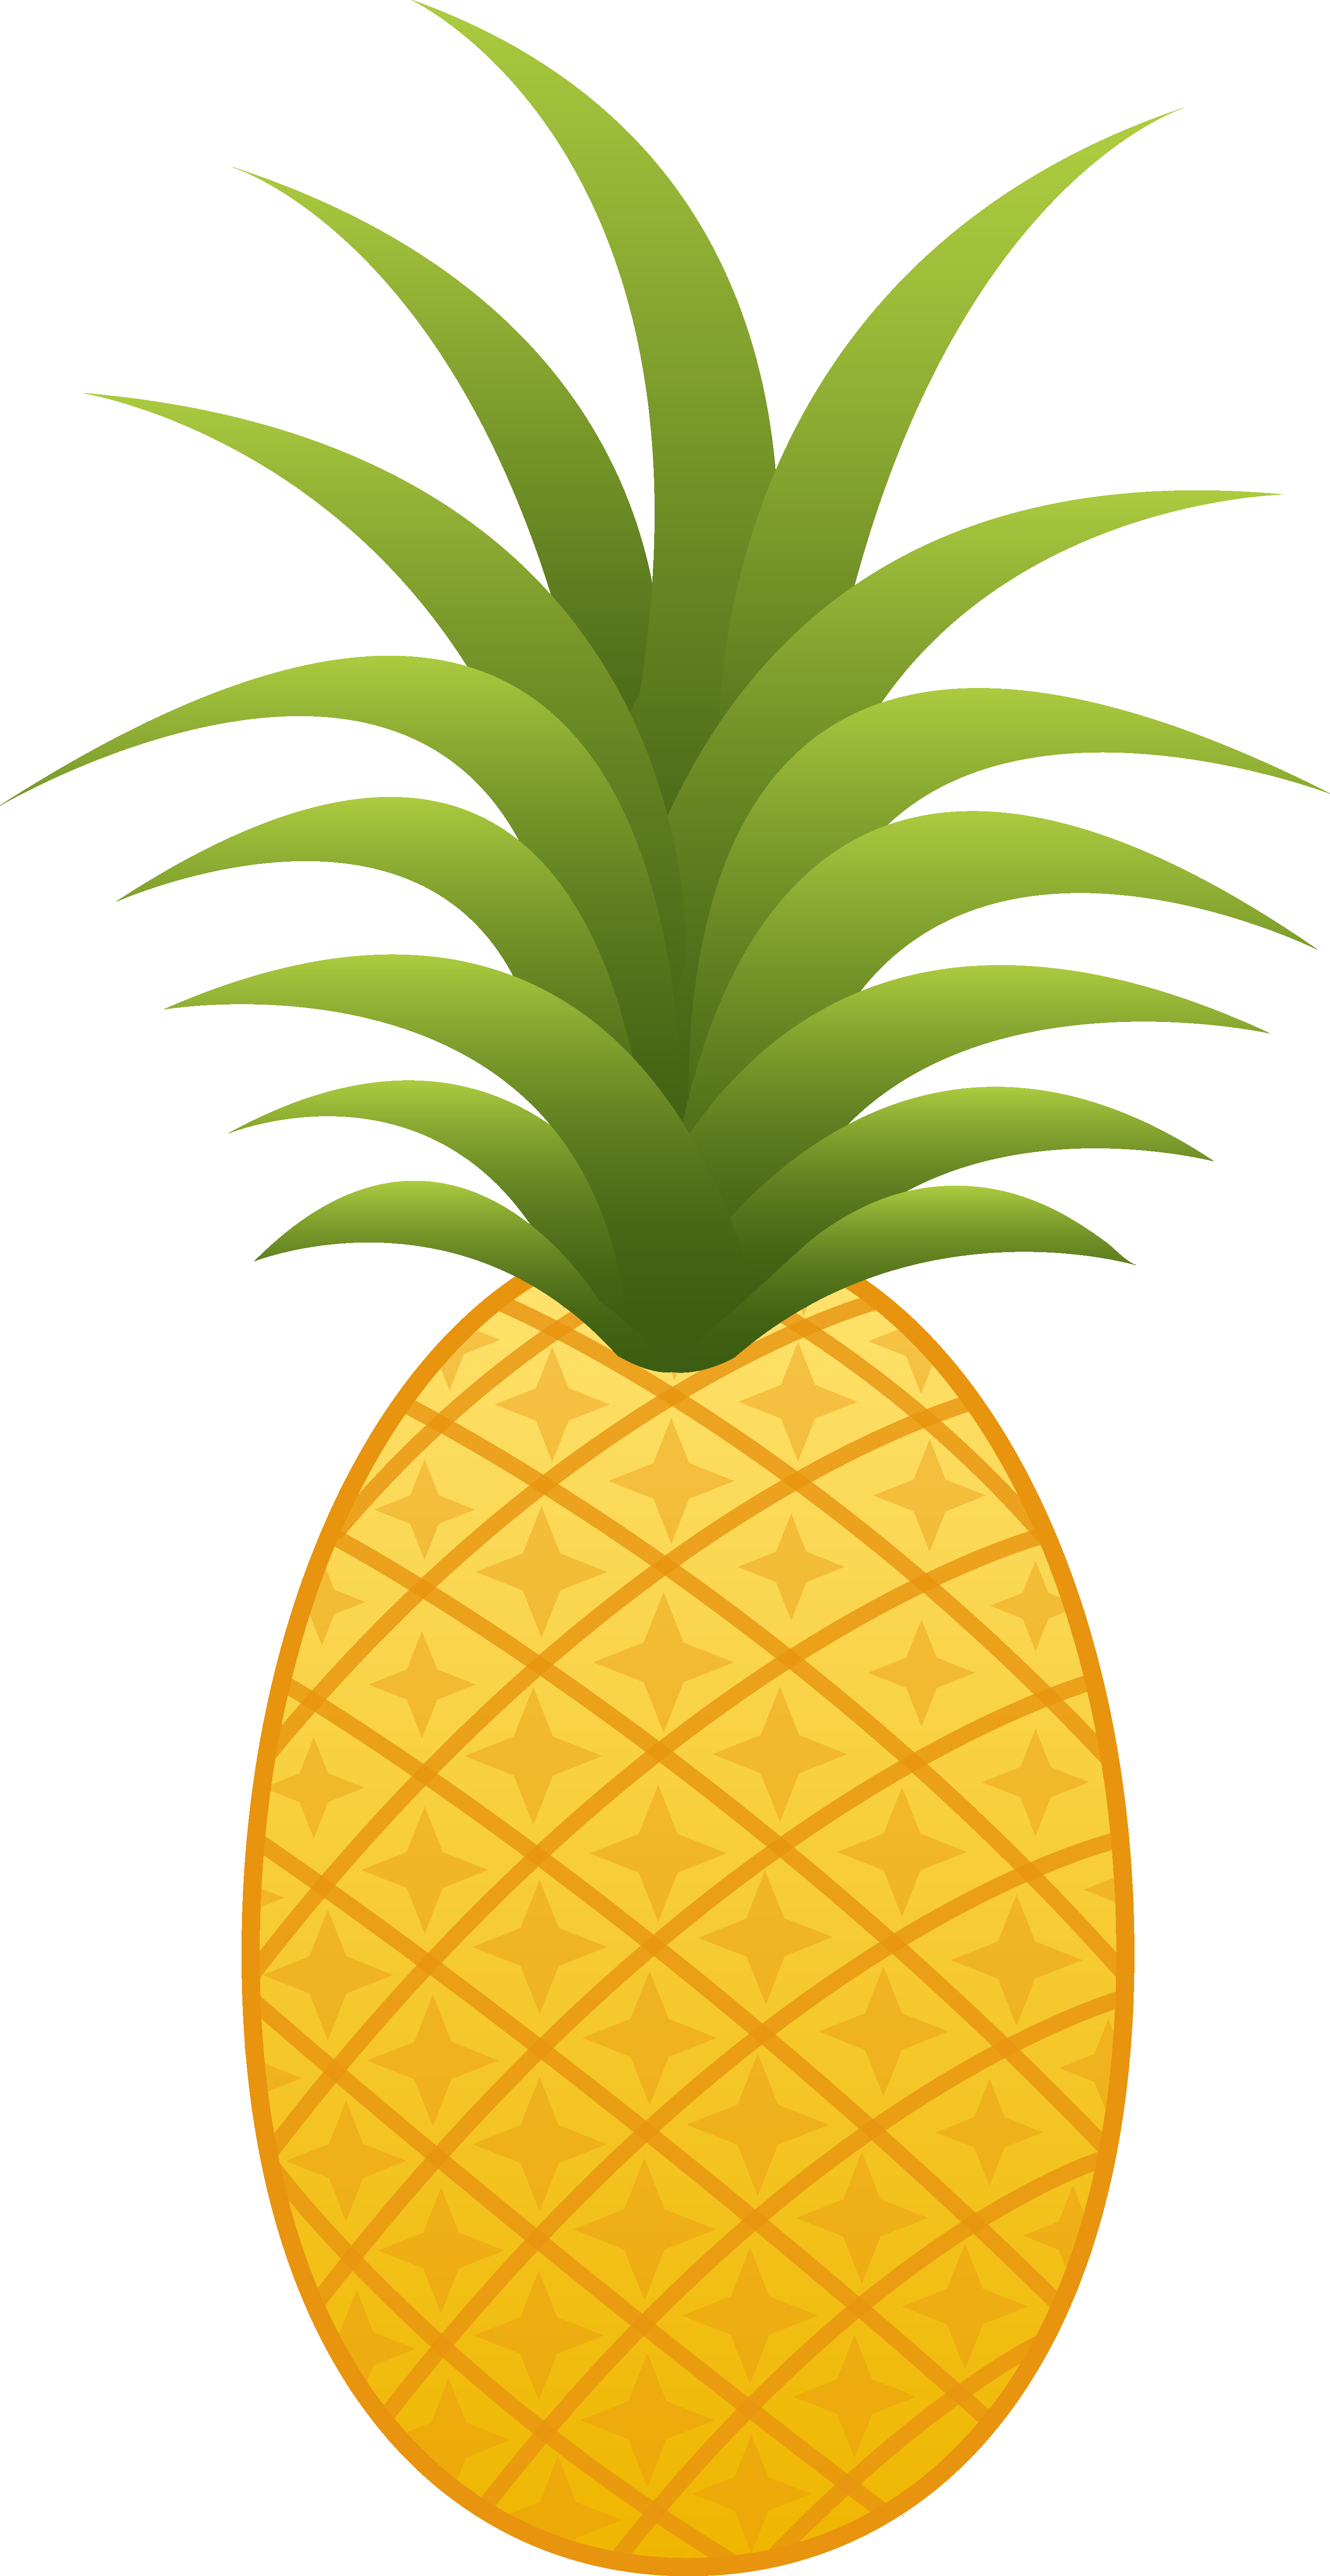 Pineapple Clip Art Png - Pineapple, Transparent background PNG HD thumbnail